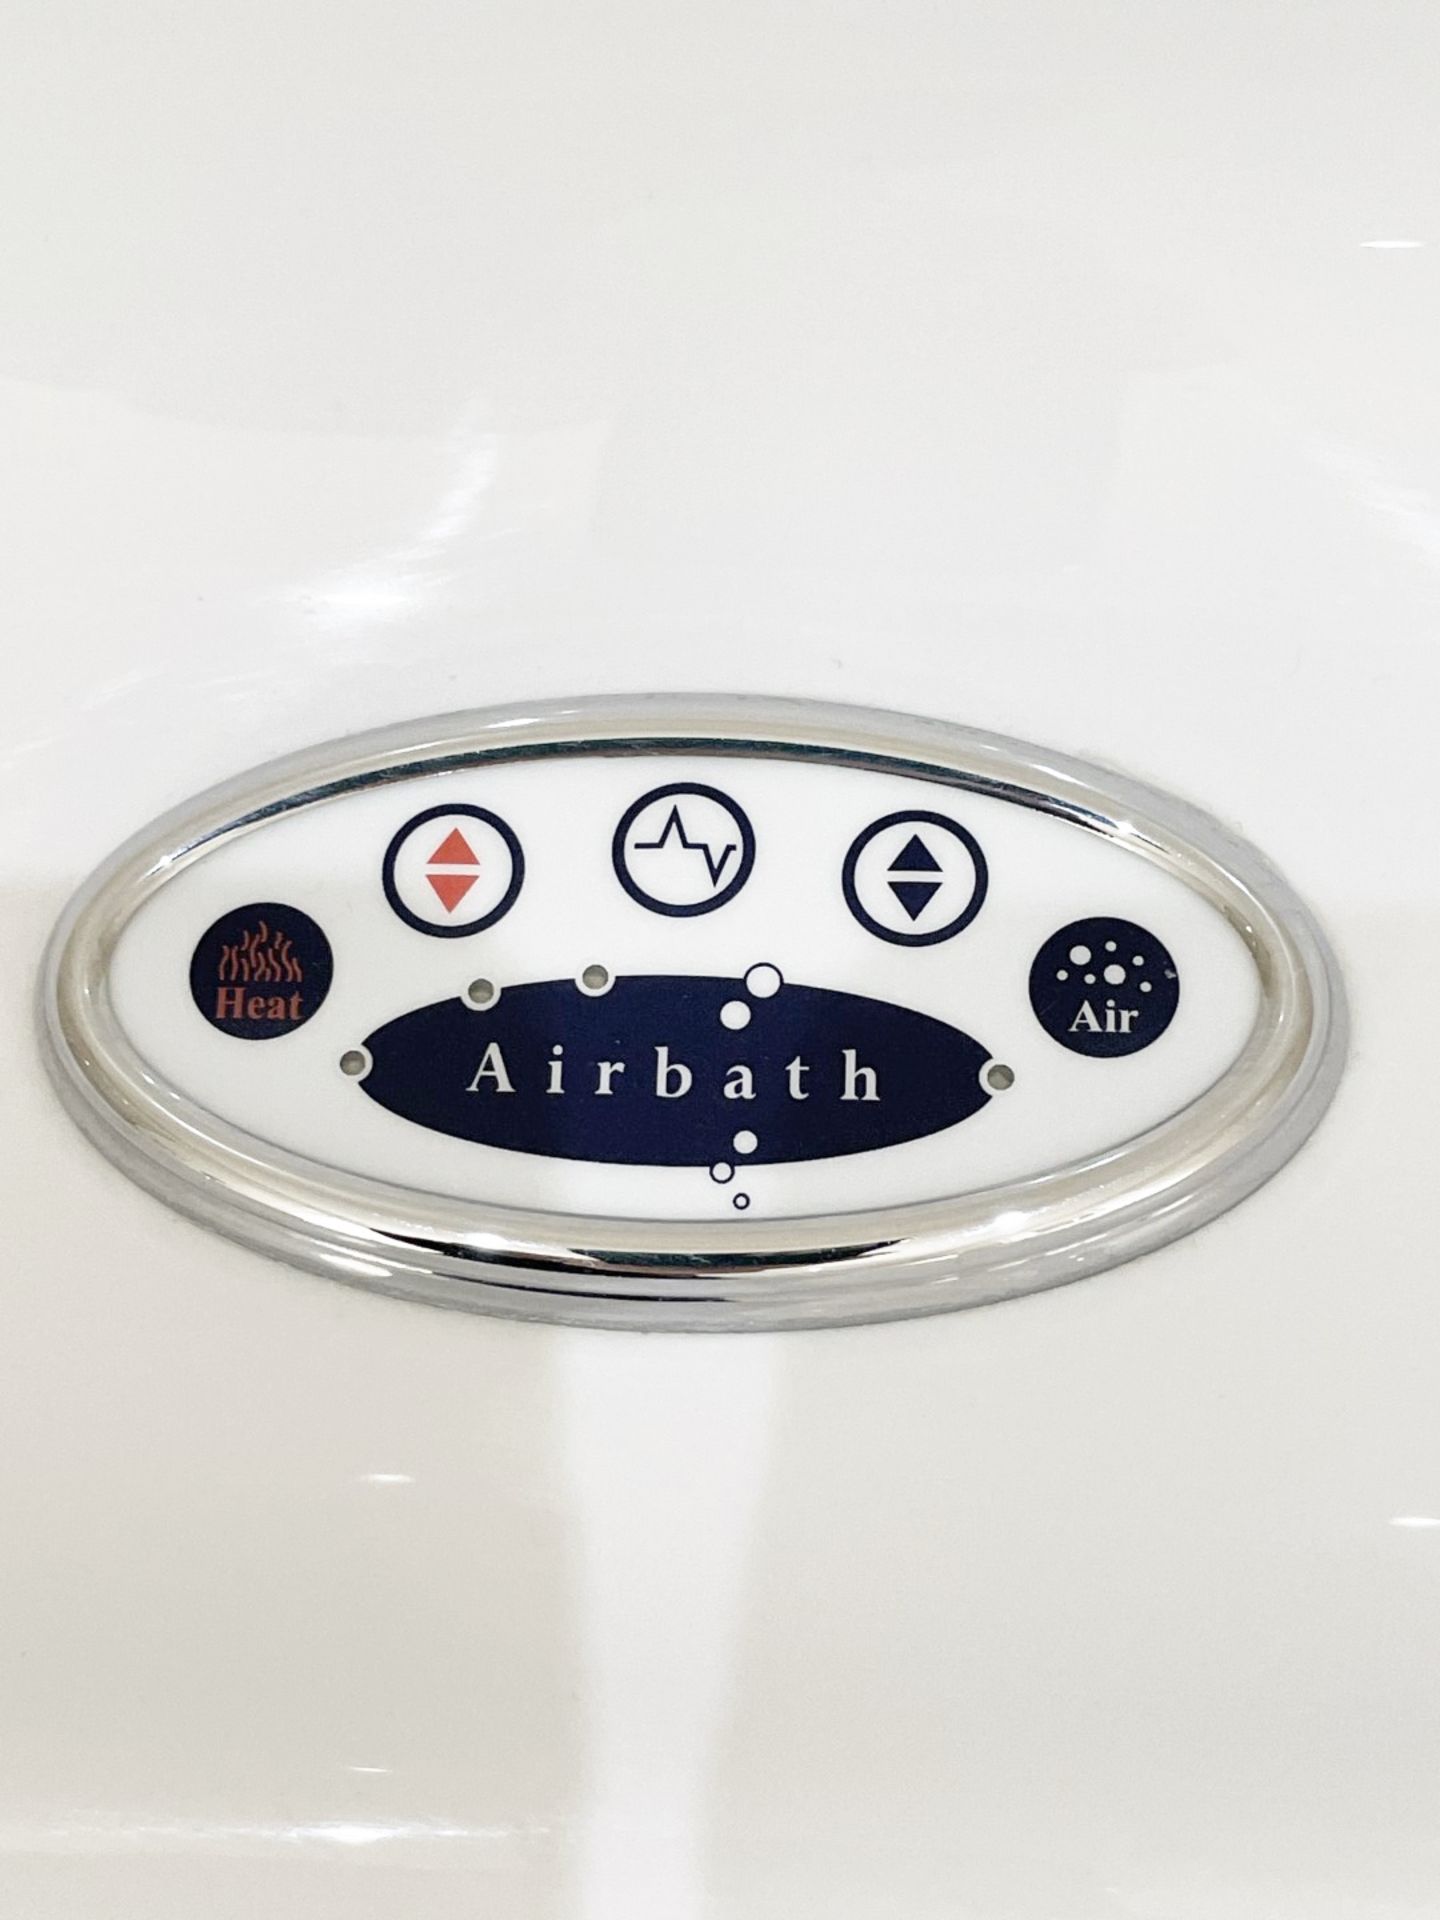 1 x AIRBATH Large Jacuzzi Spa Bath, with Axor Thermostat  - Ref: PAN230 Bed1/bth - CL896 - NO VAT - Image 7 of 20